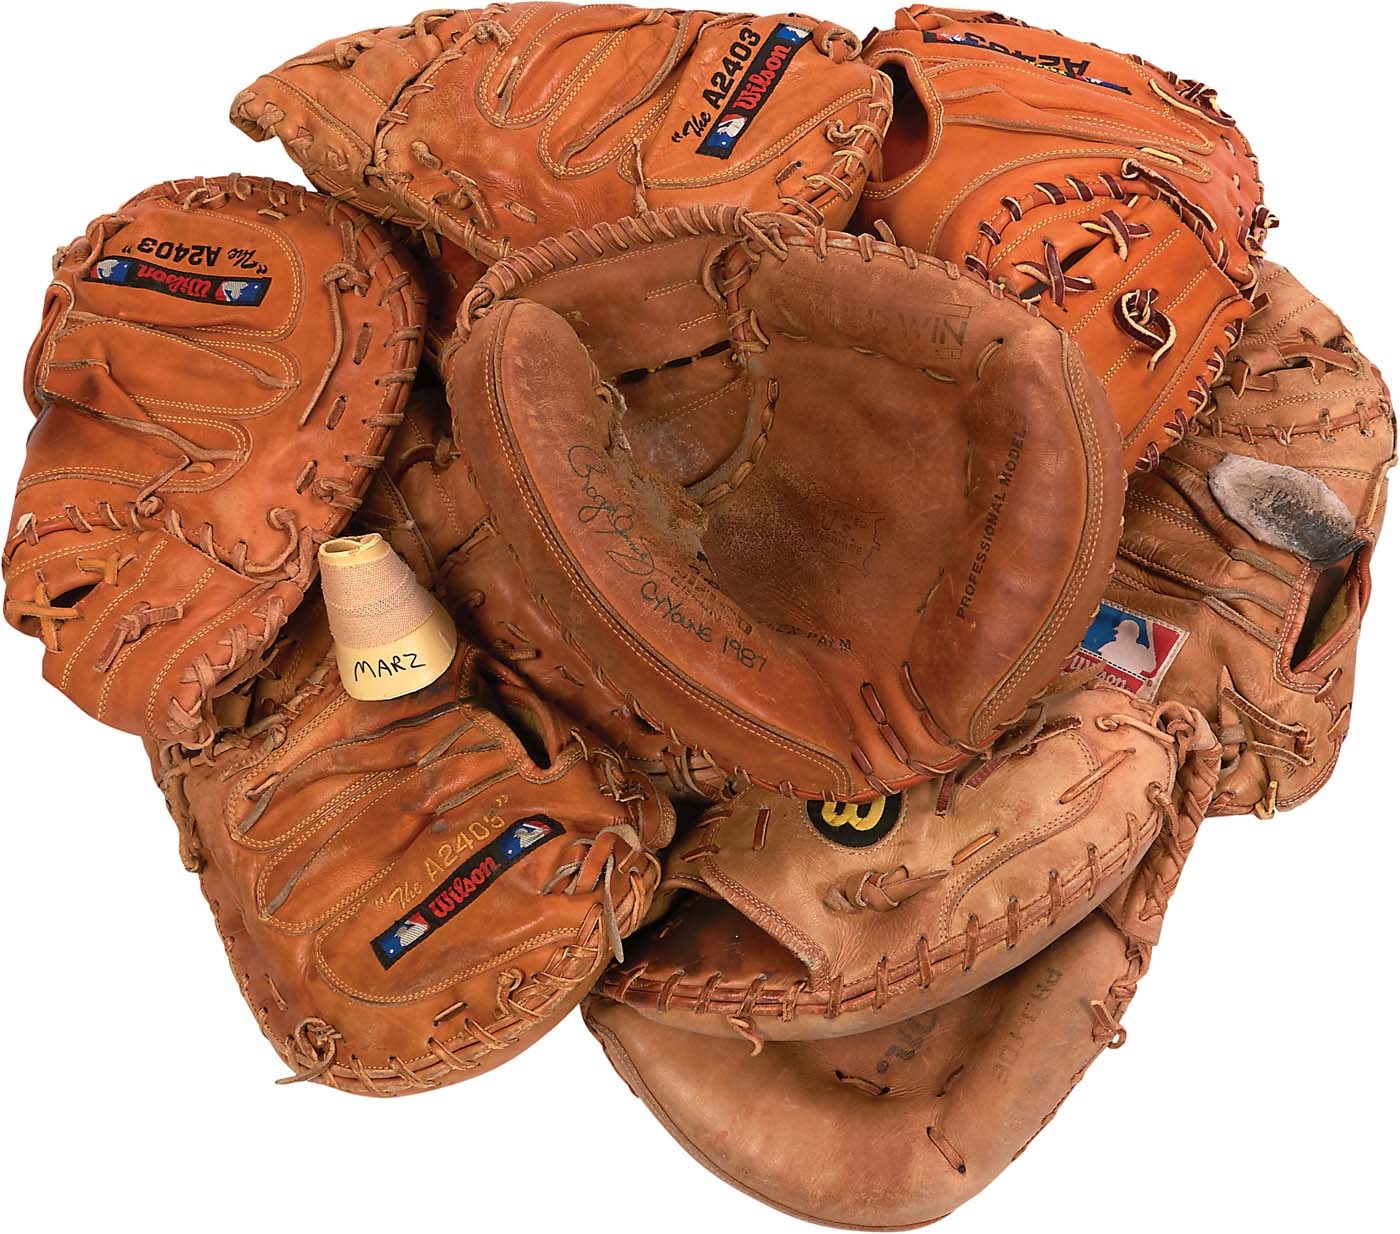 John Marzano Game Worn Catcher's Mitt Collection w/One "Destroyed" by Roger Clemens (Some Photo-Matched)